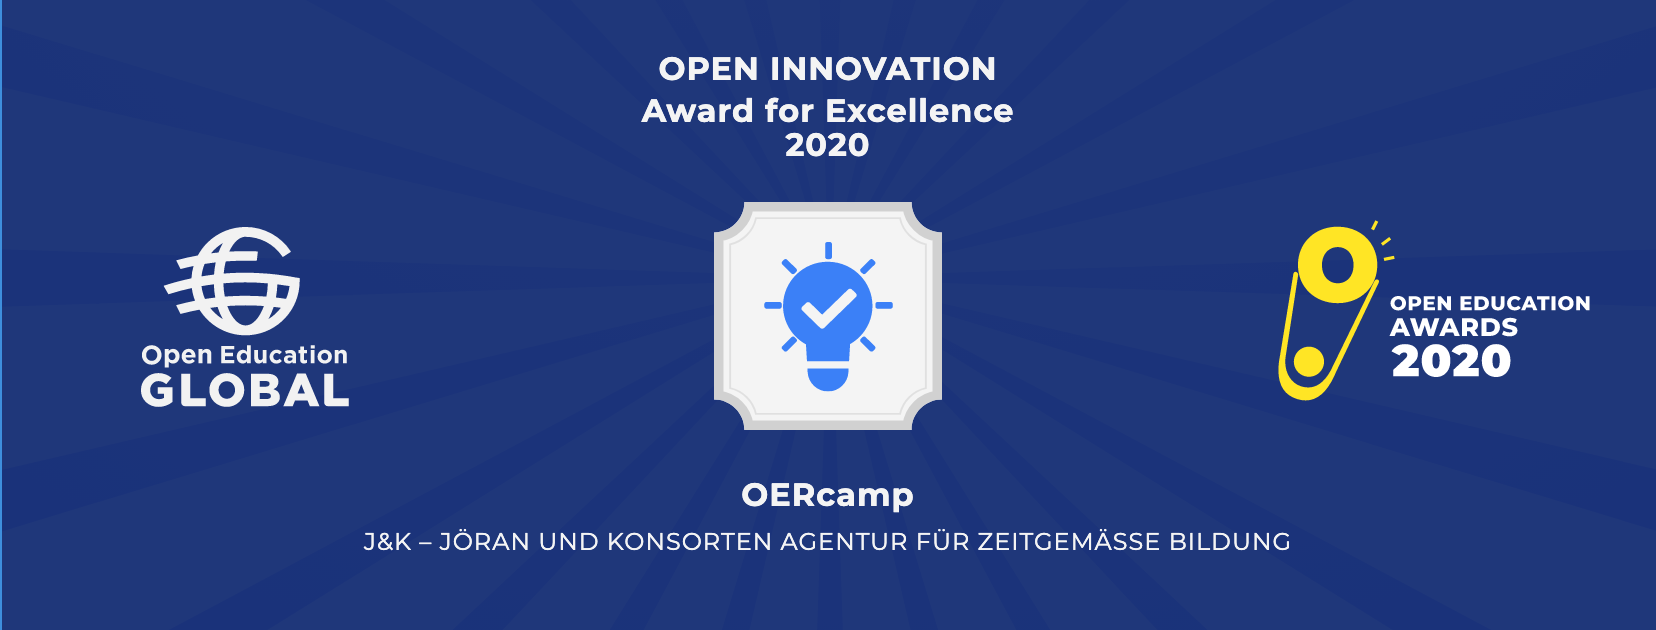 Open Innovation Award 2020 for Excellence